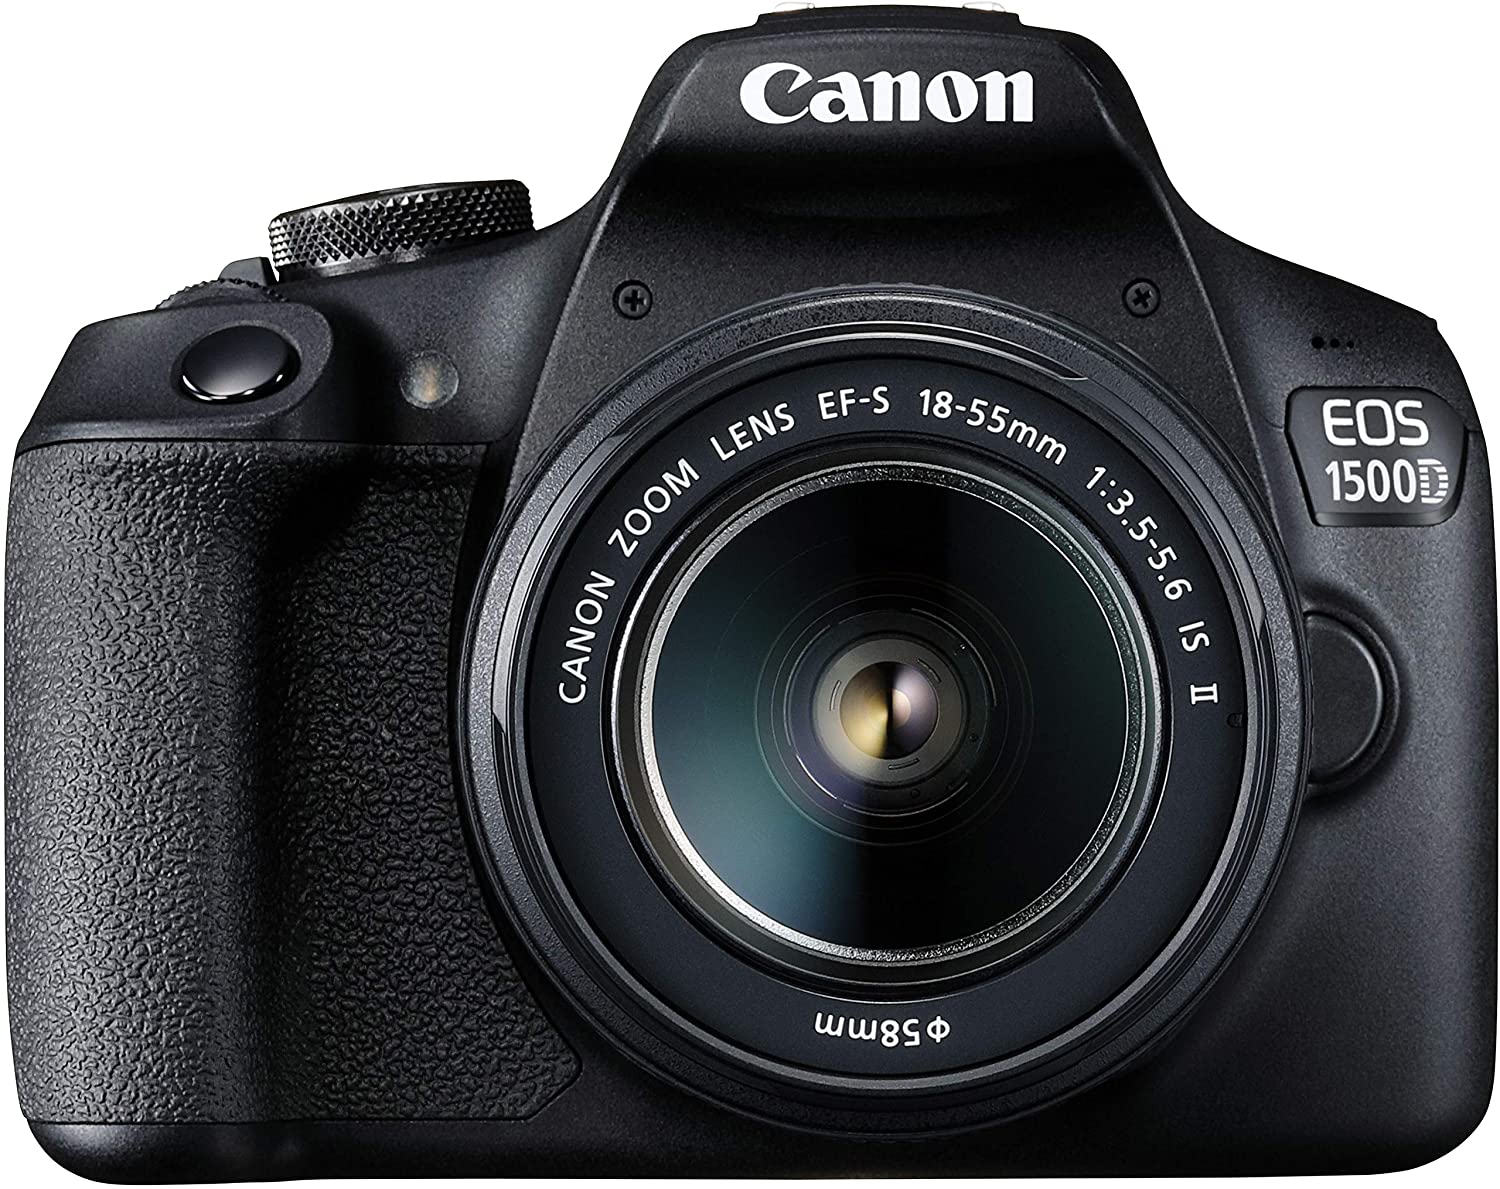 Canon EOS 1500D DSLR cameras for beginners